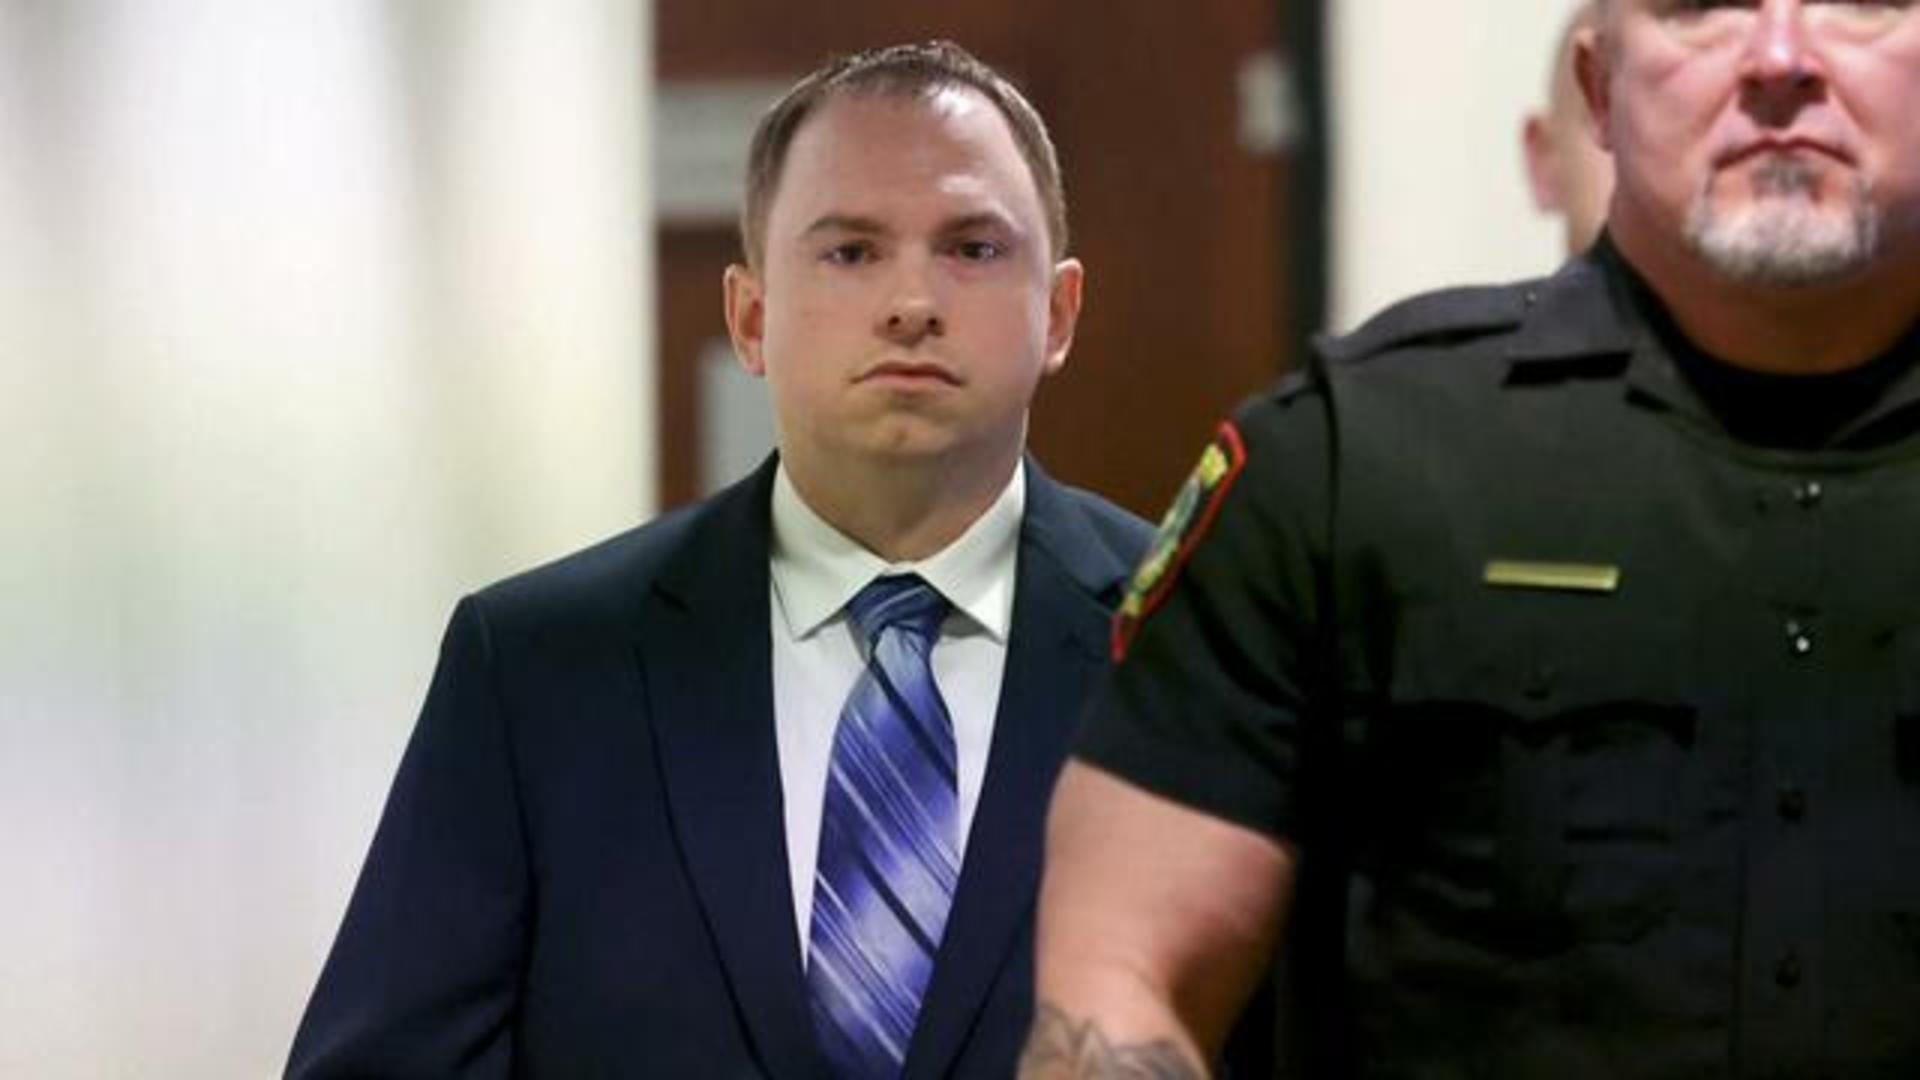 Former officer Aaron Dean found guilty of manslaughter in shooting of Atatiana Jefferson